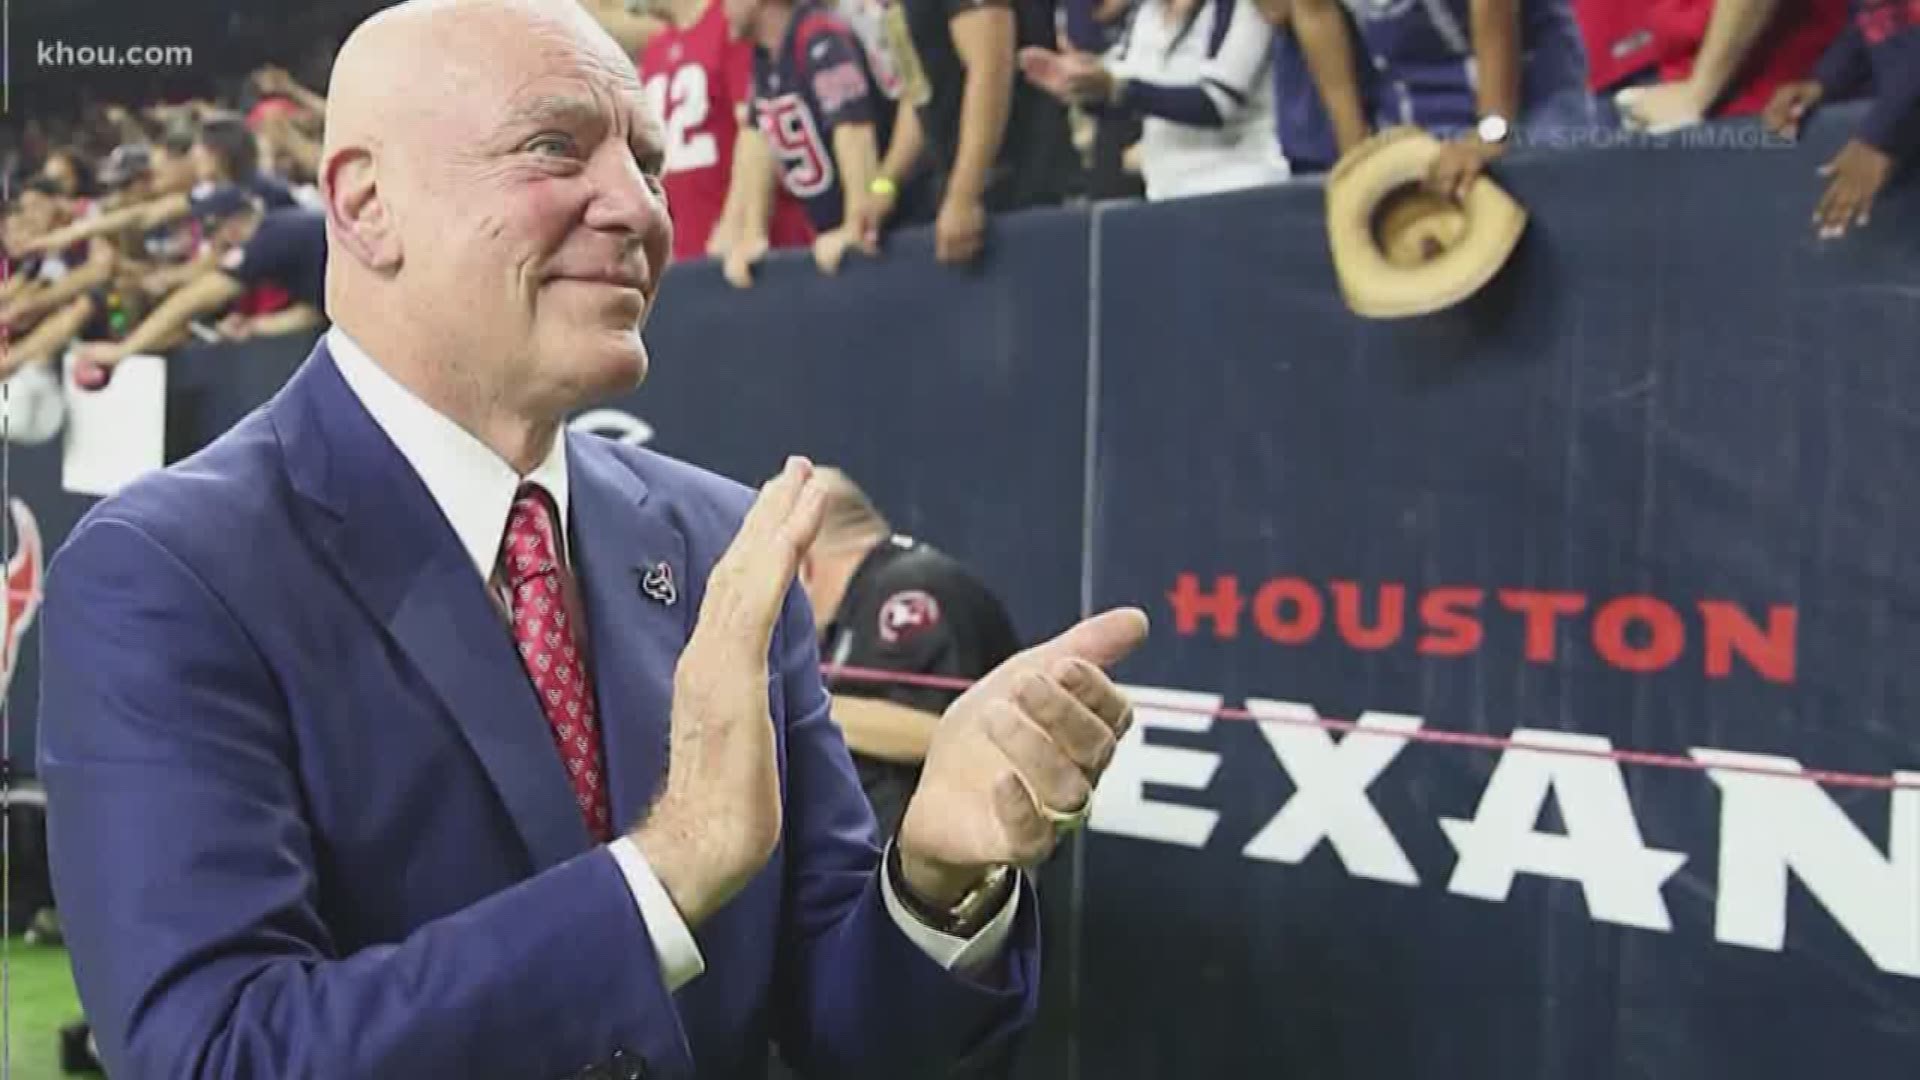 The impact of Bob McNair extends far beyond the field. He changed Houston's landscape and also helped changed people's lives through many charitable contributions.